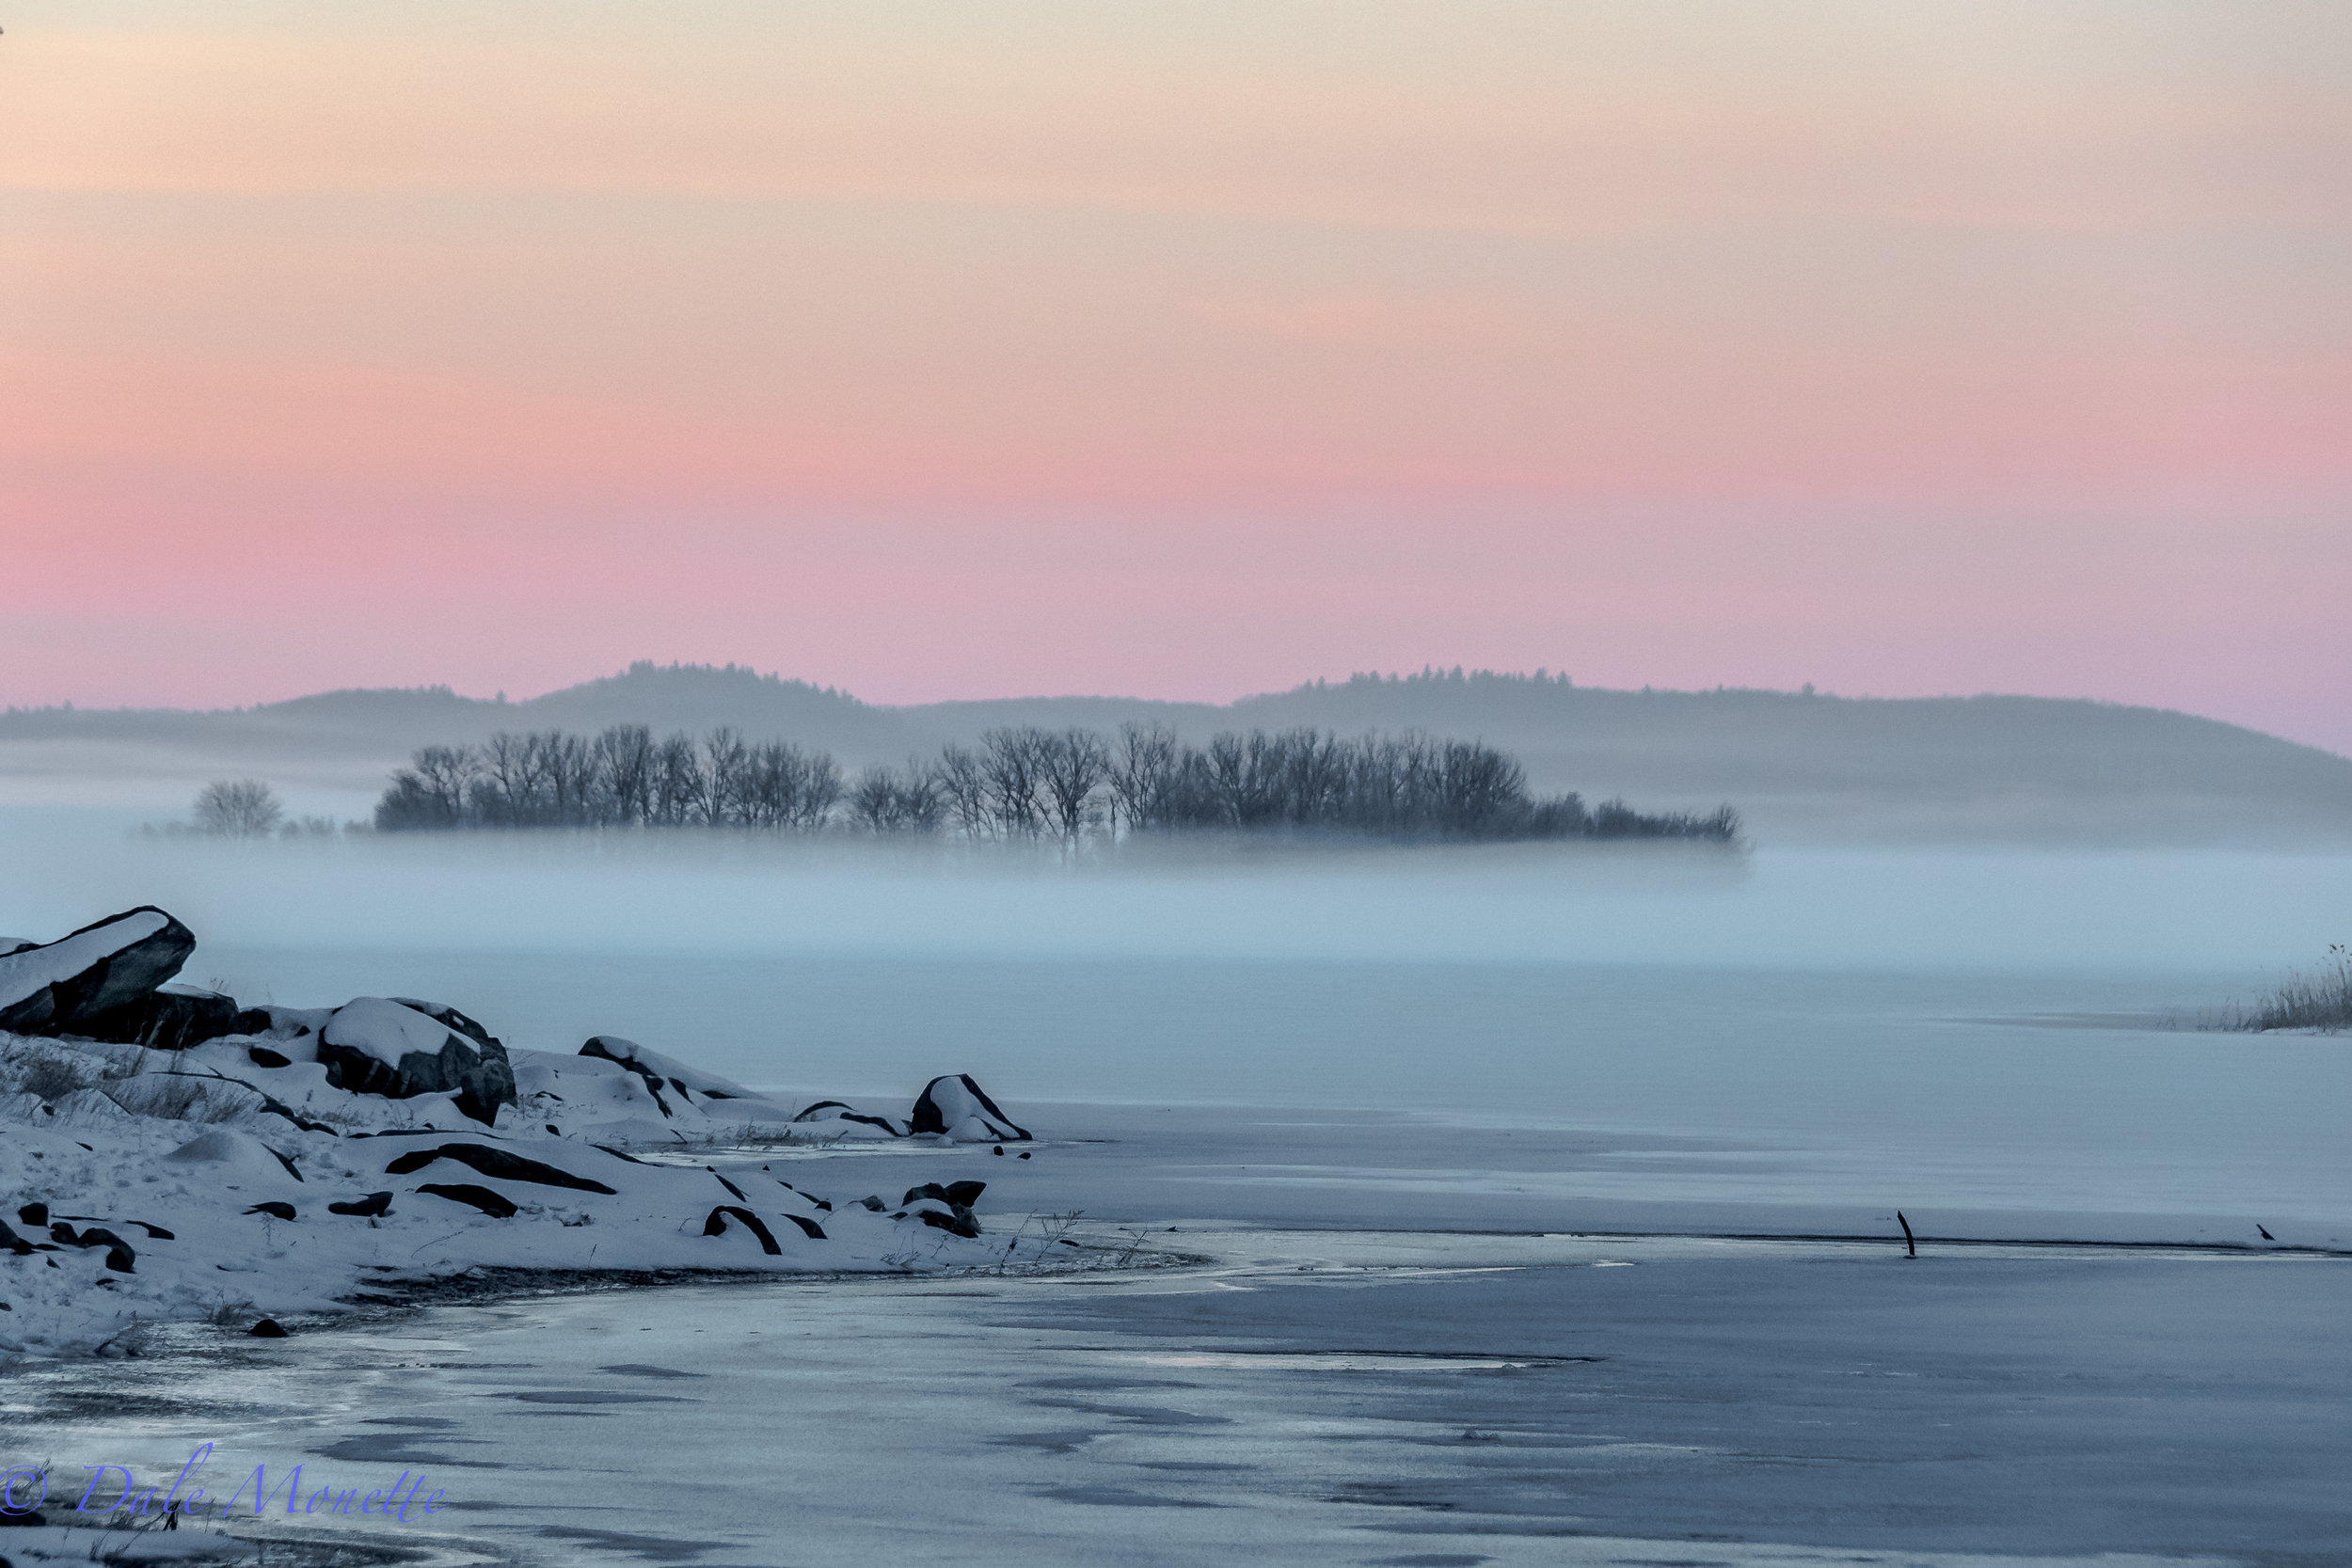   It's a rare thing to see fog when it's 14 degrees F at the Quabbin Reservoir,&nbsp; but here it was this morning !&nbsp; 2/19/18  